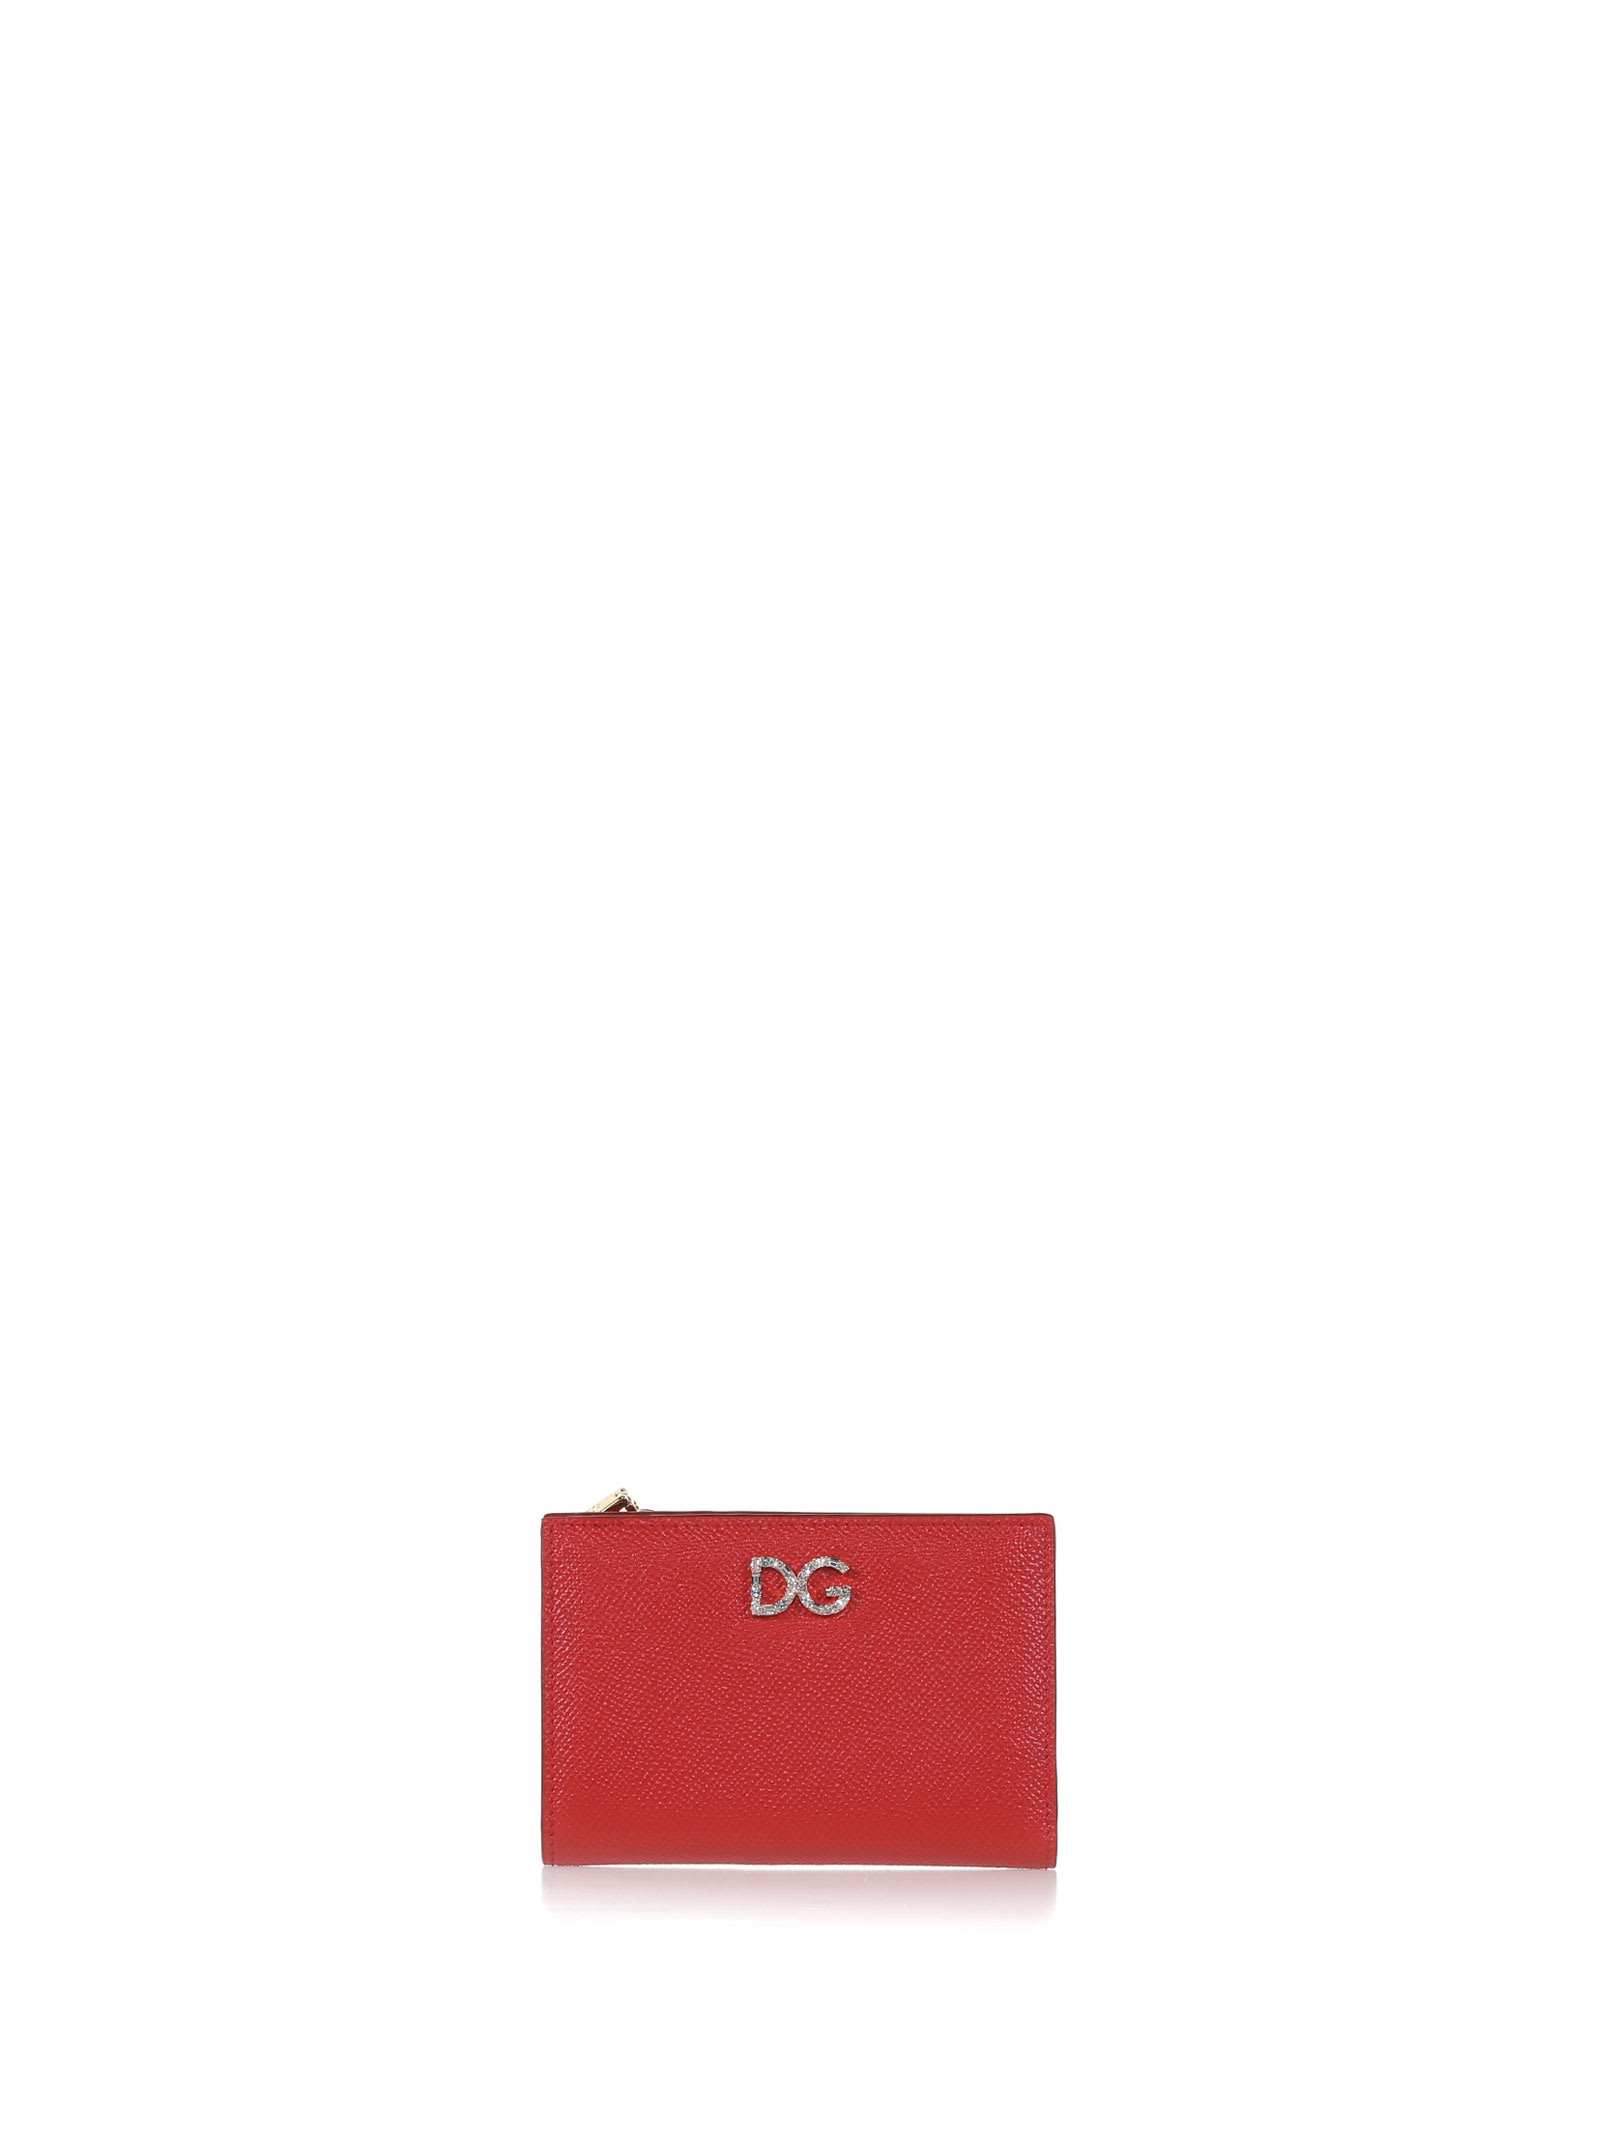 Dolce & Gabbana Red Leather Wallet